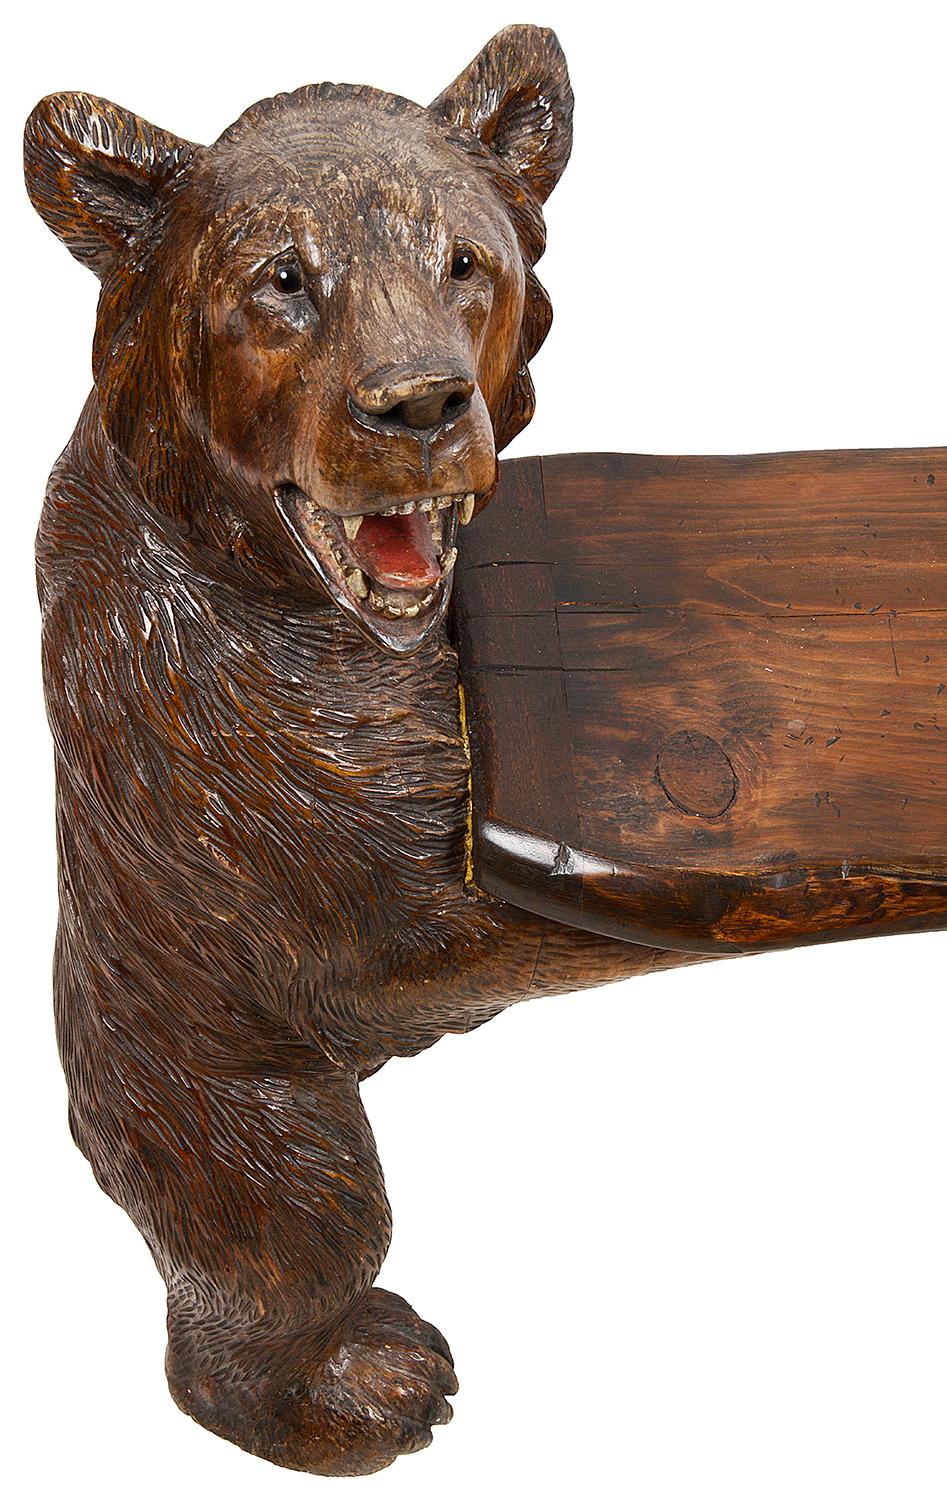 A good quality 19th century Black Forest carved bench, having two bears standing on their hind legs supporting the wooden seat. Measures: 41